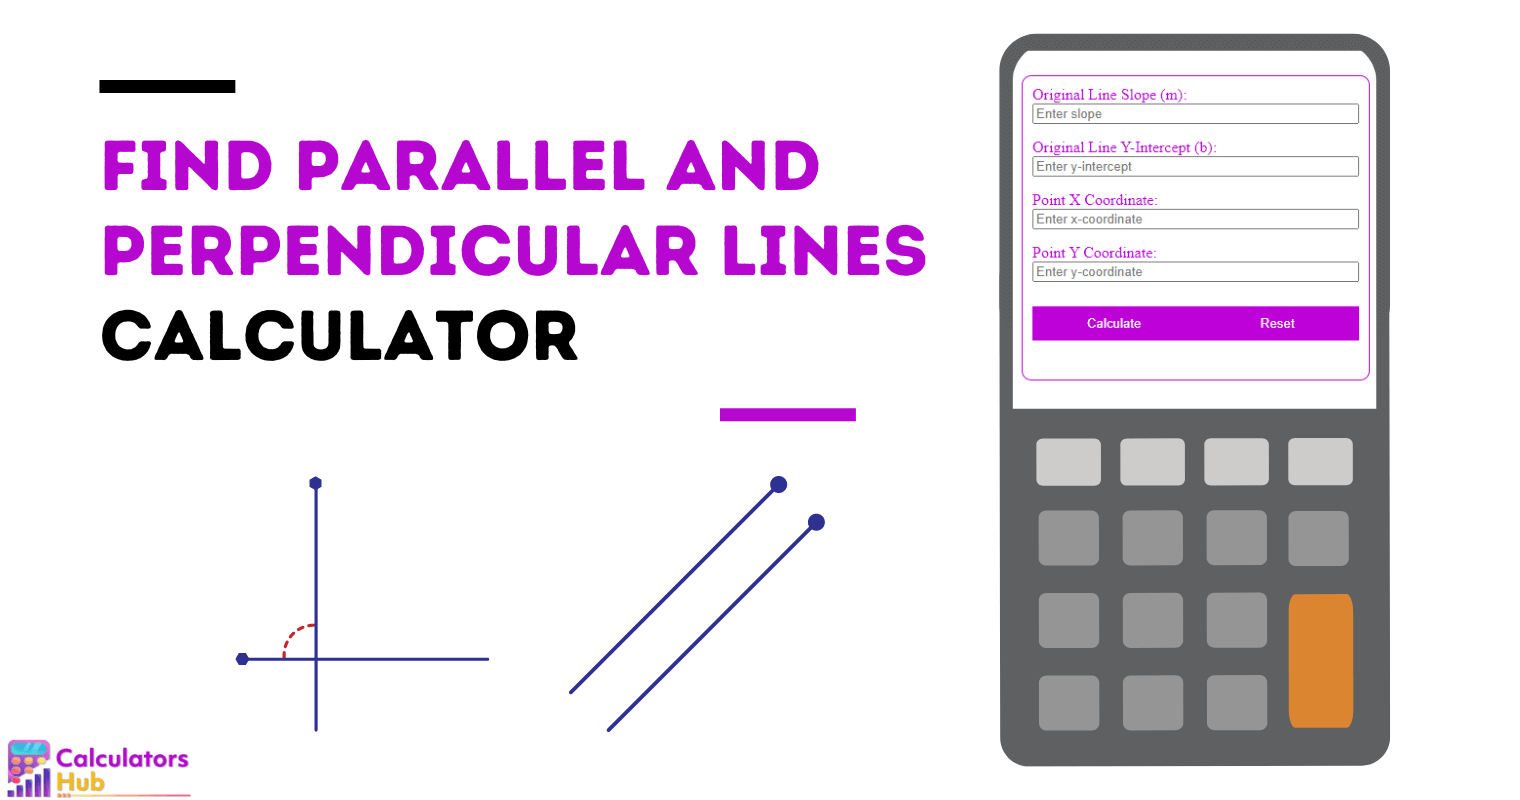 Find Parallel and Perpendicular Lines Calculator